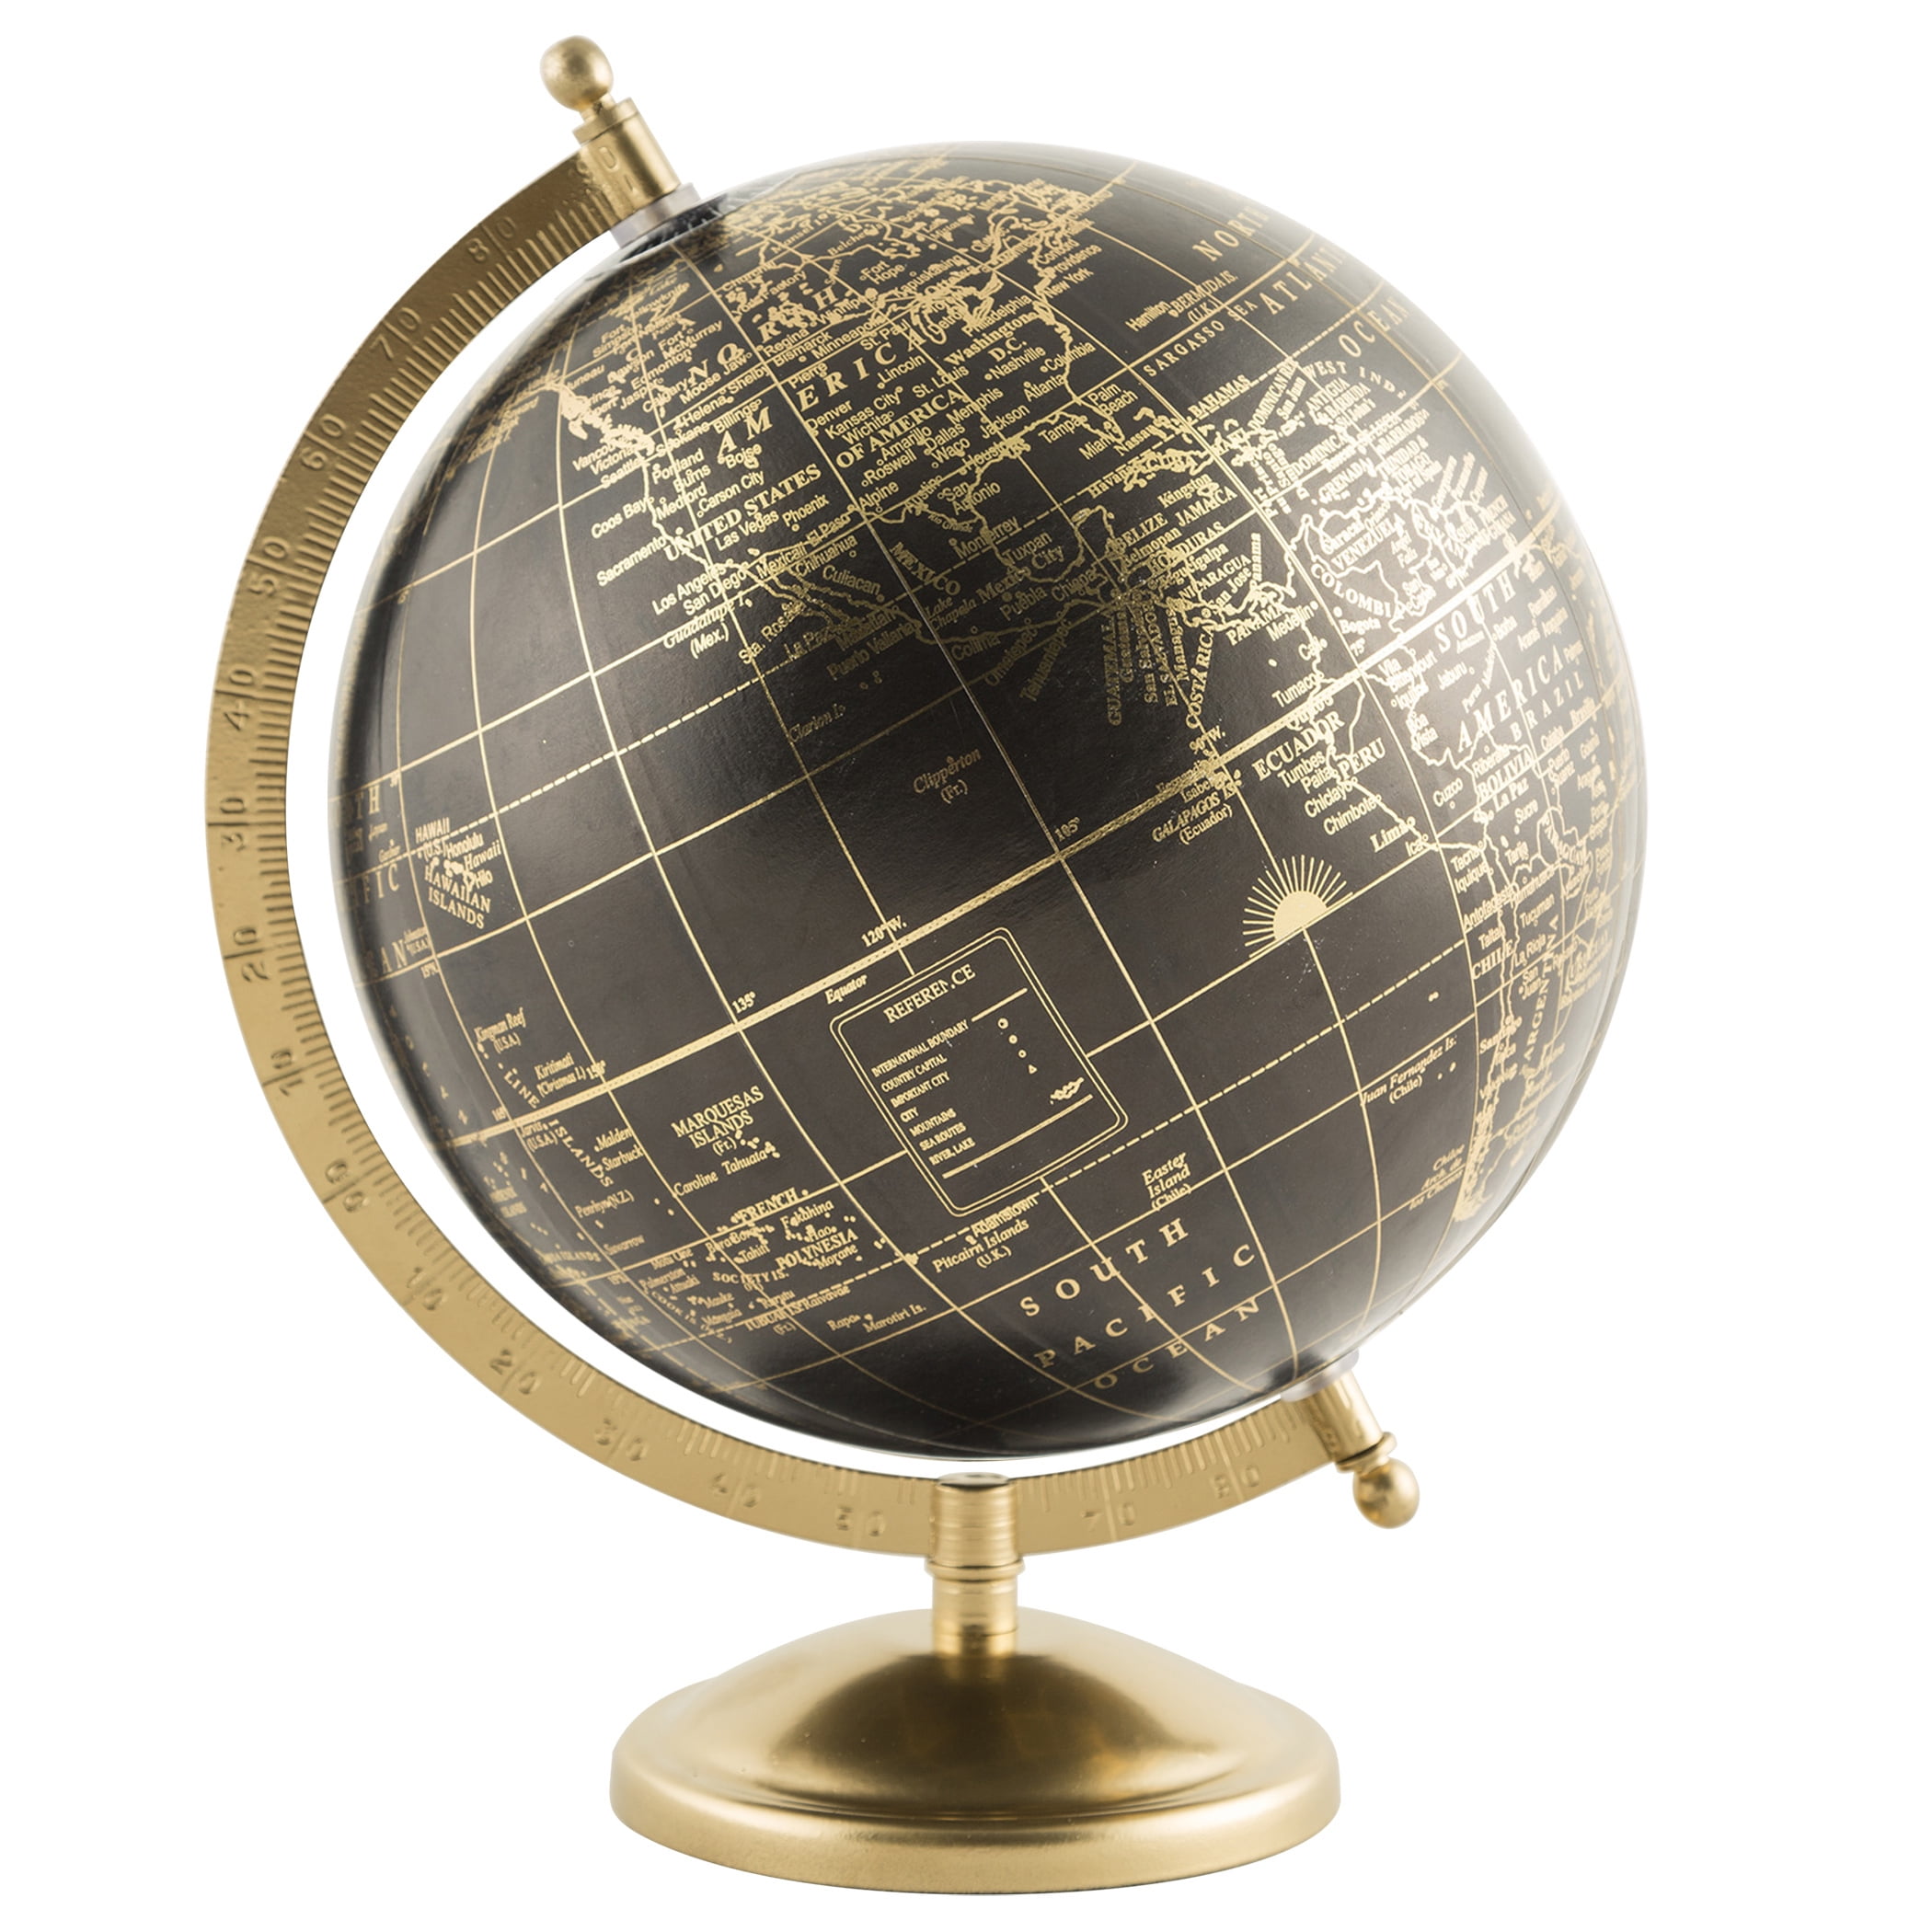 Better Homes and Gardens Decorative Table Top Globe 